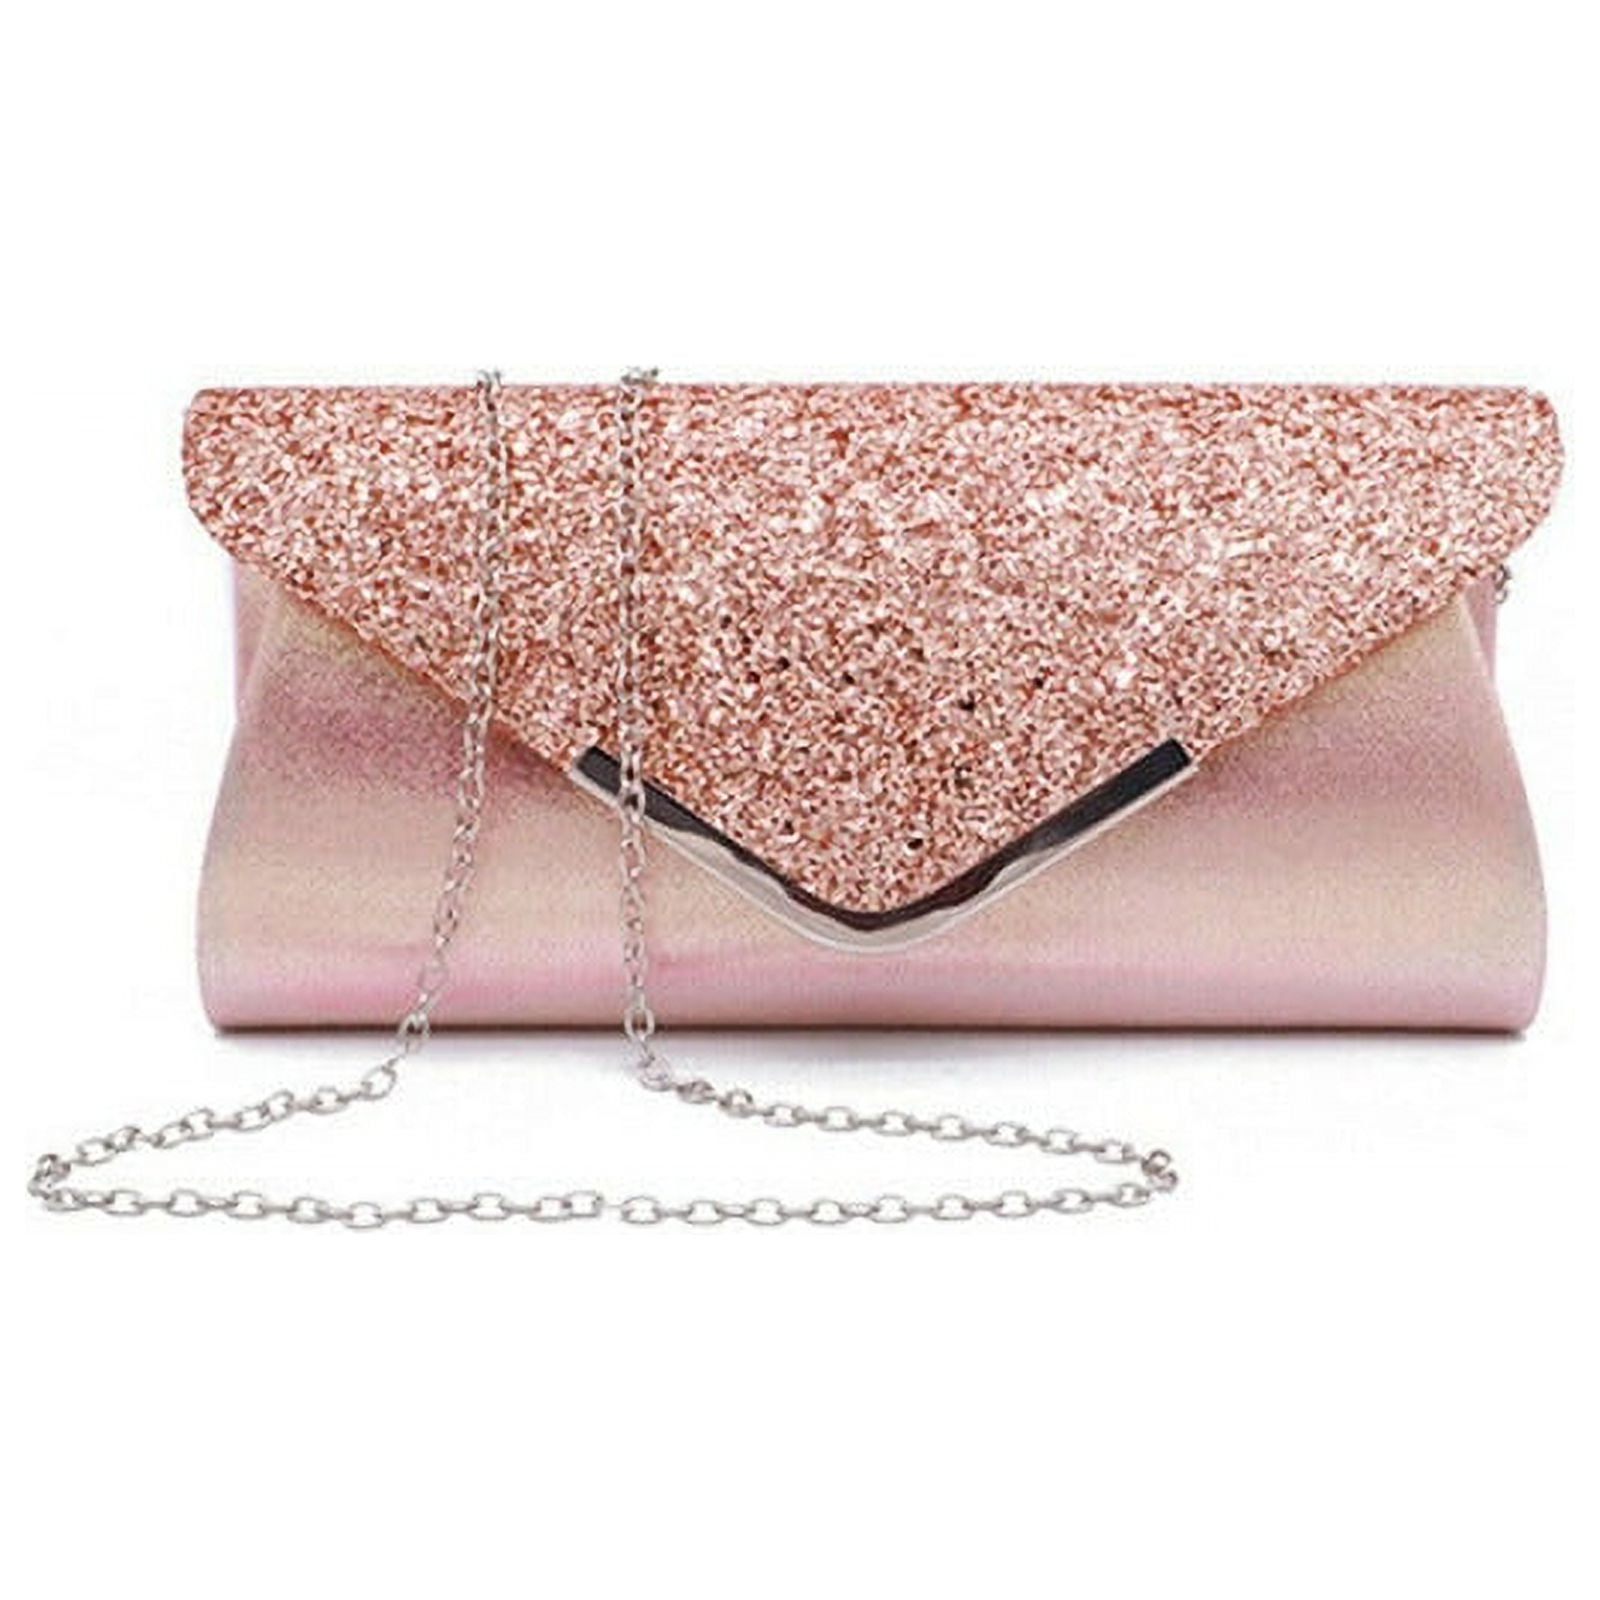 Fashion Evening Leather Clutch Purse - Power Day Sale